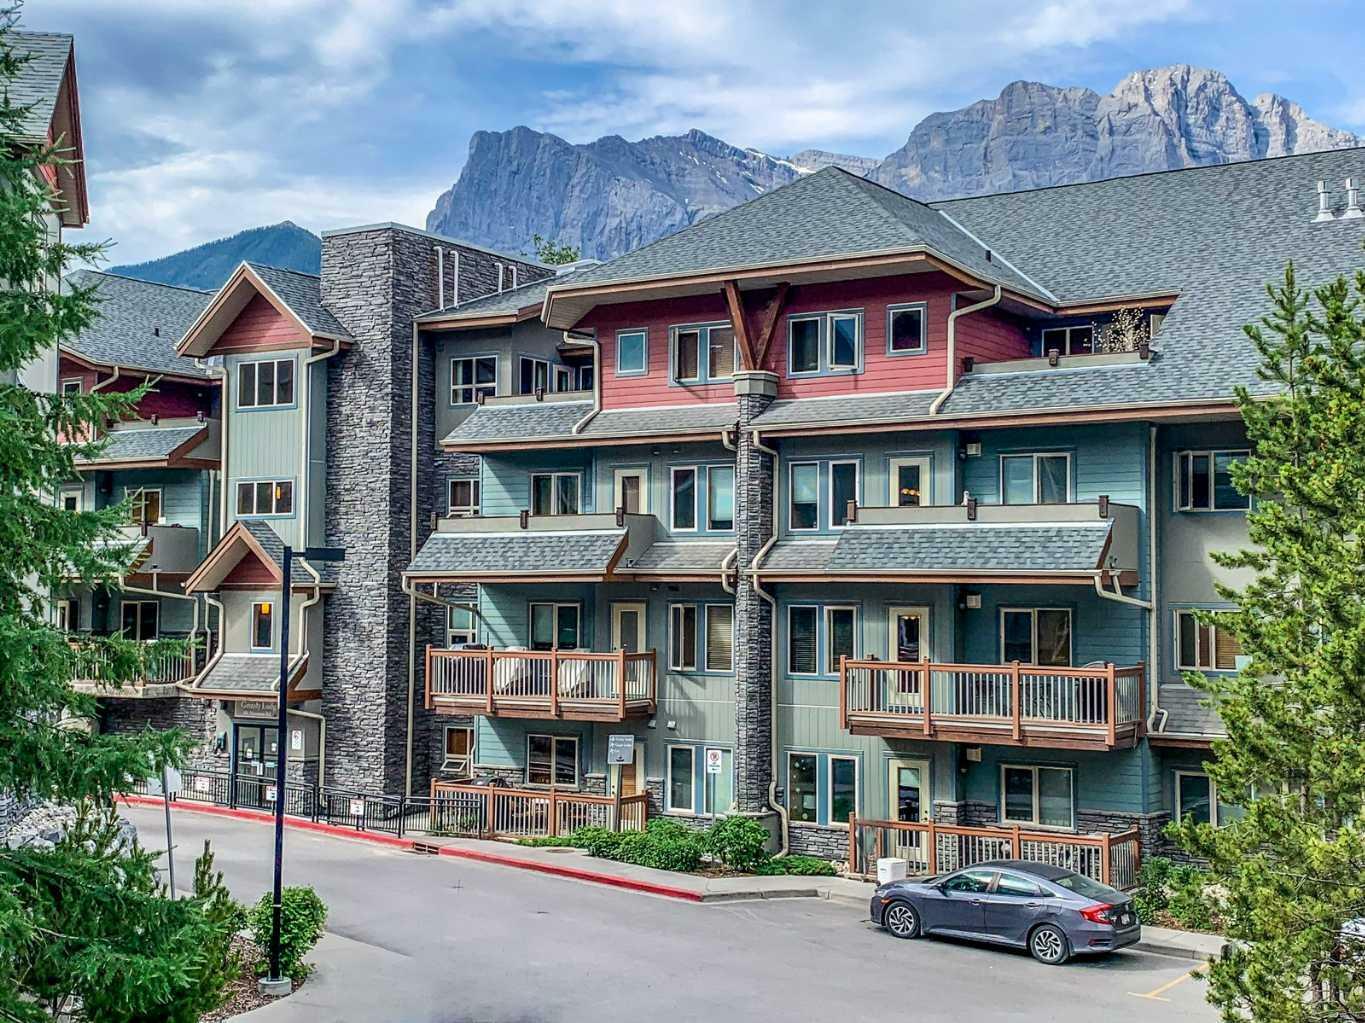 222, 101 Montane Road 222  Canmore AB T1W 0G2 photo